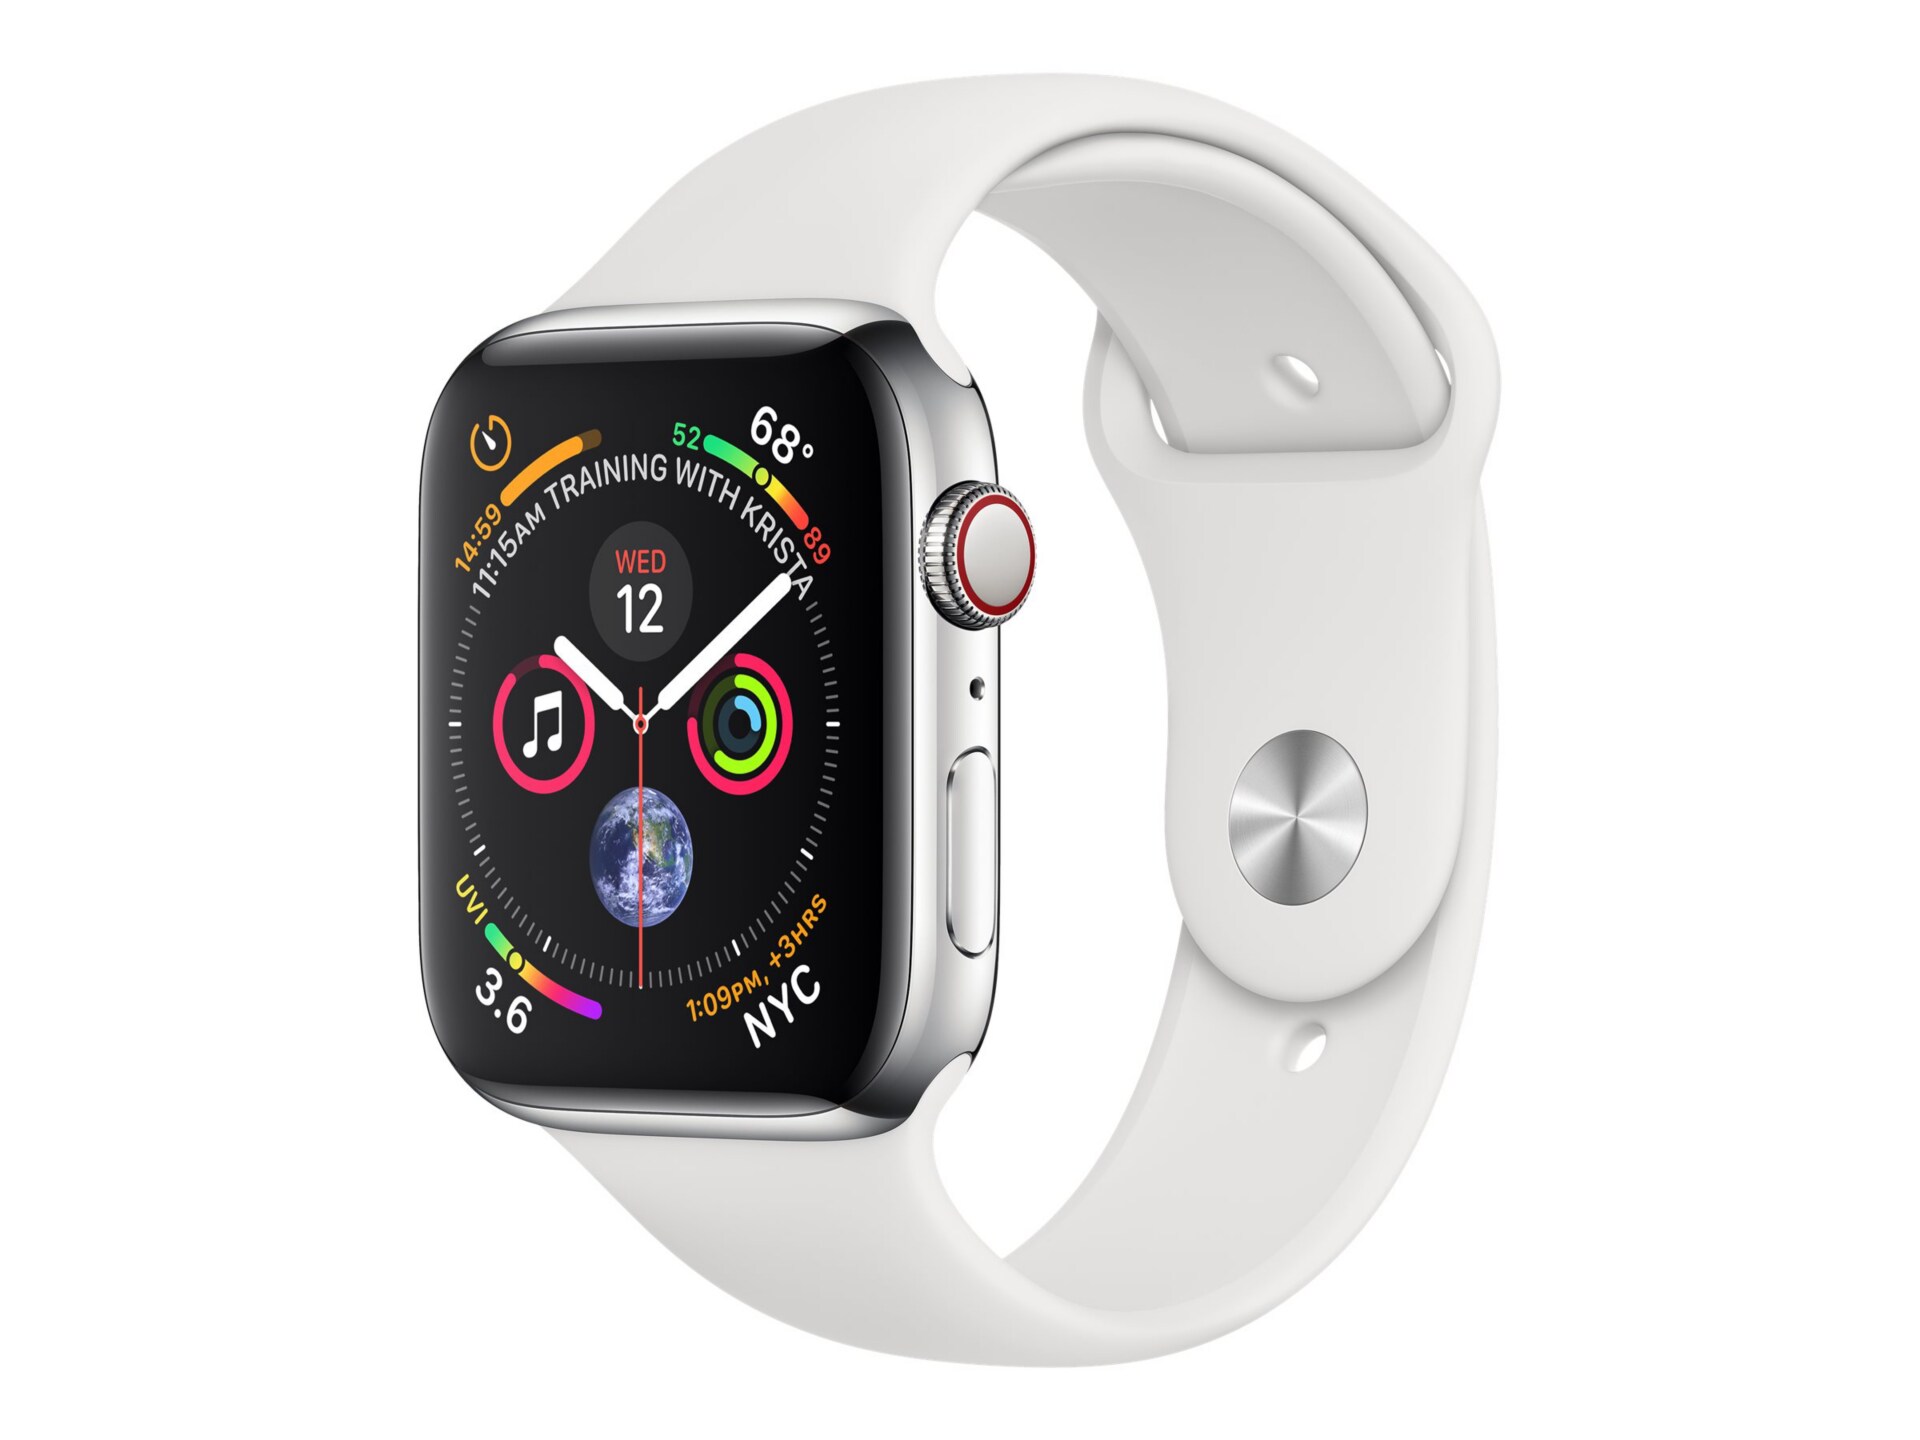 Apple Watch Series 4 (GPS + Cellular) - stainless steel - smart watch with